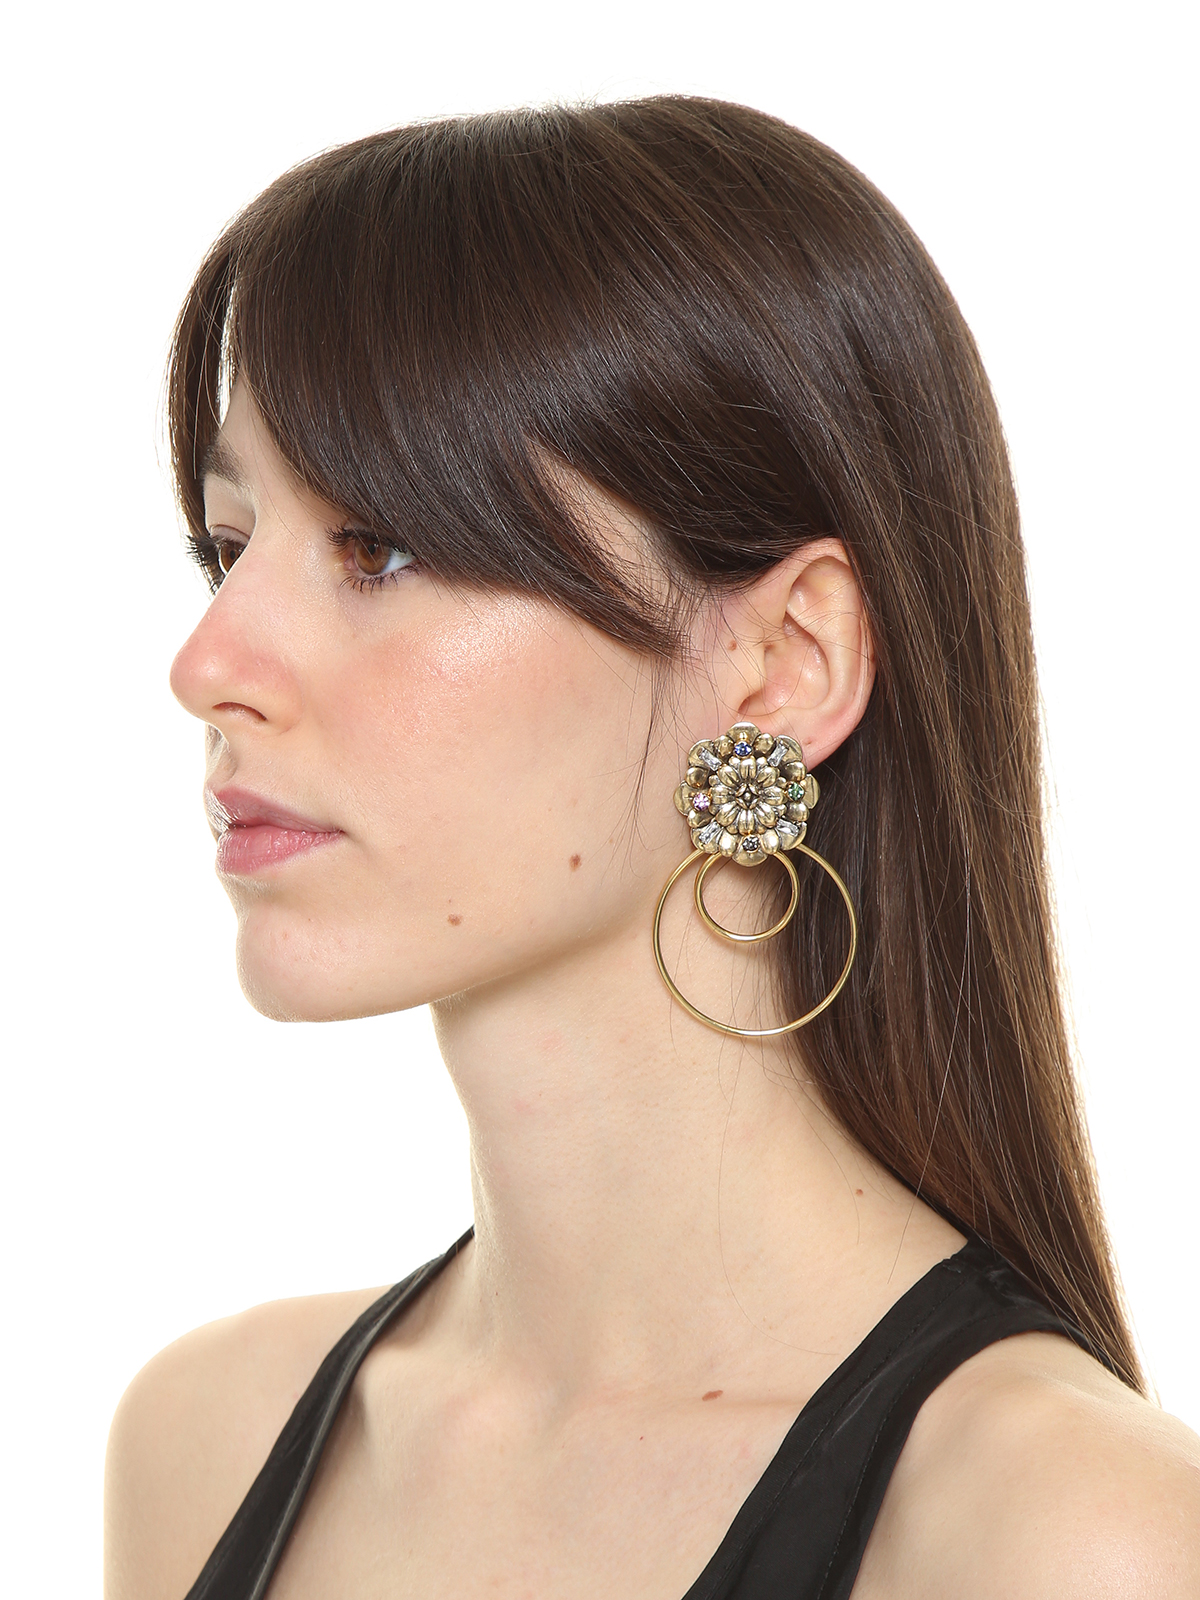 Flower earrings with double hoops and multicolor stones